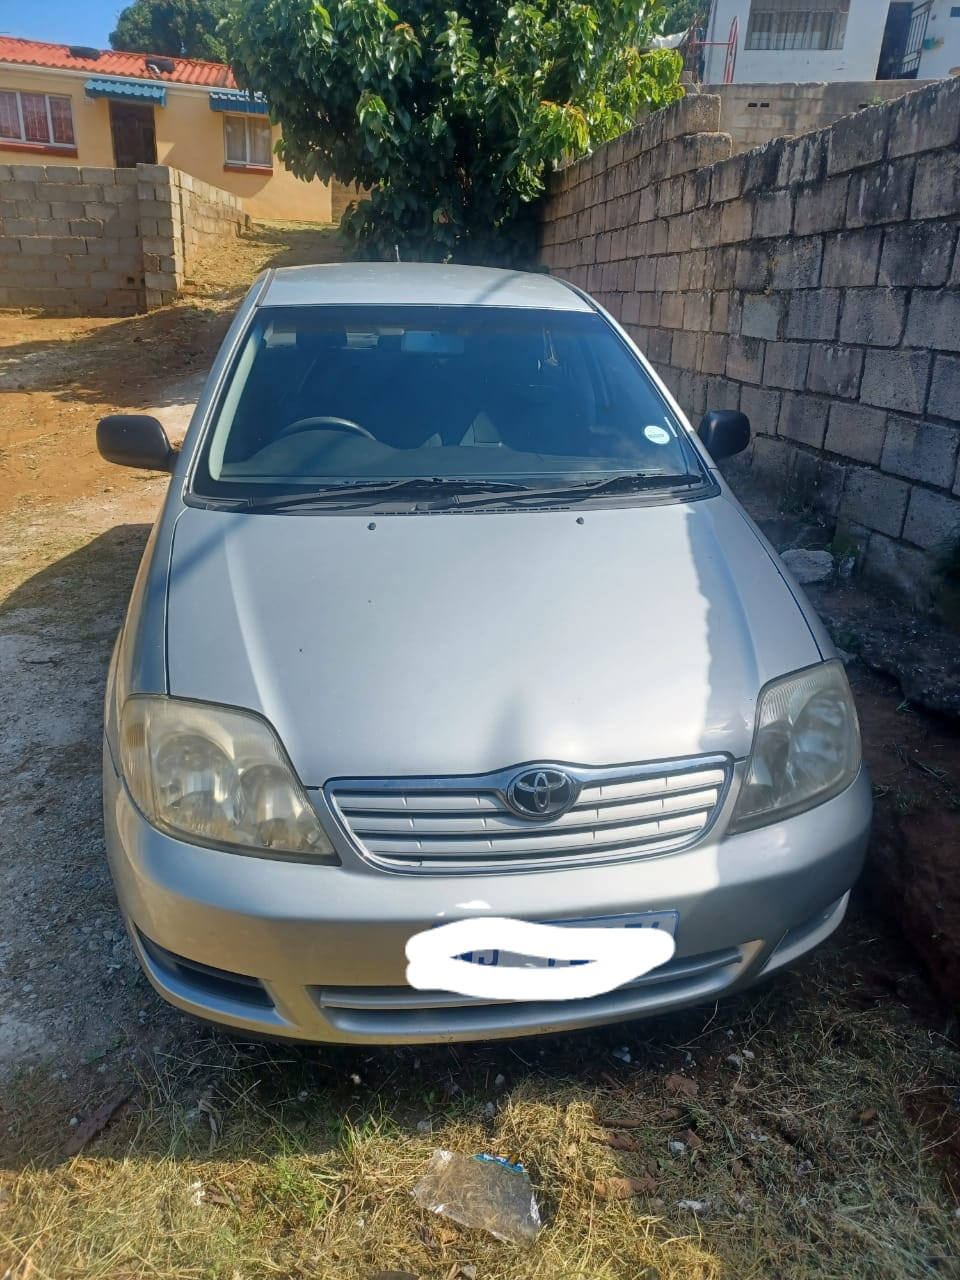 Stolen vehicle recovered by Durban Metro Police Service in Lamontville